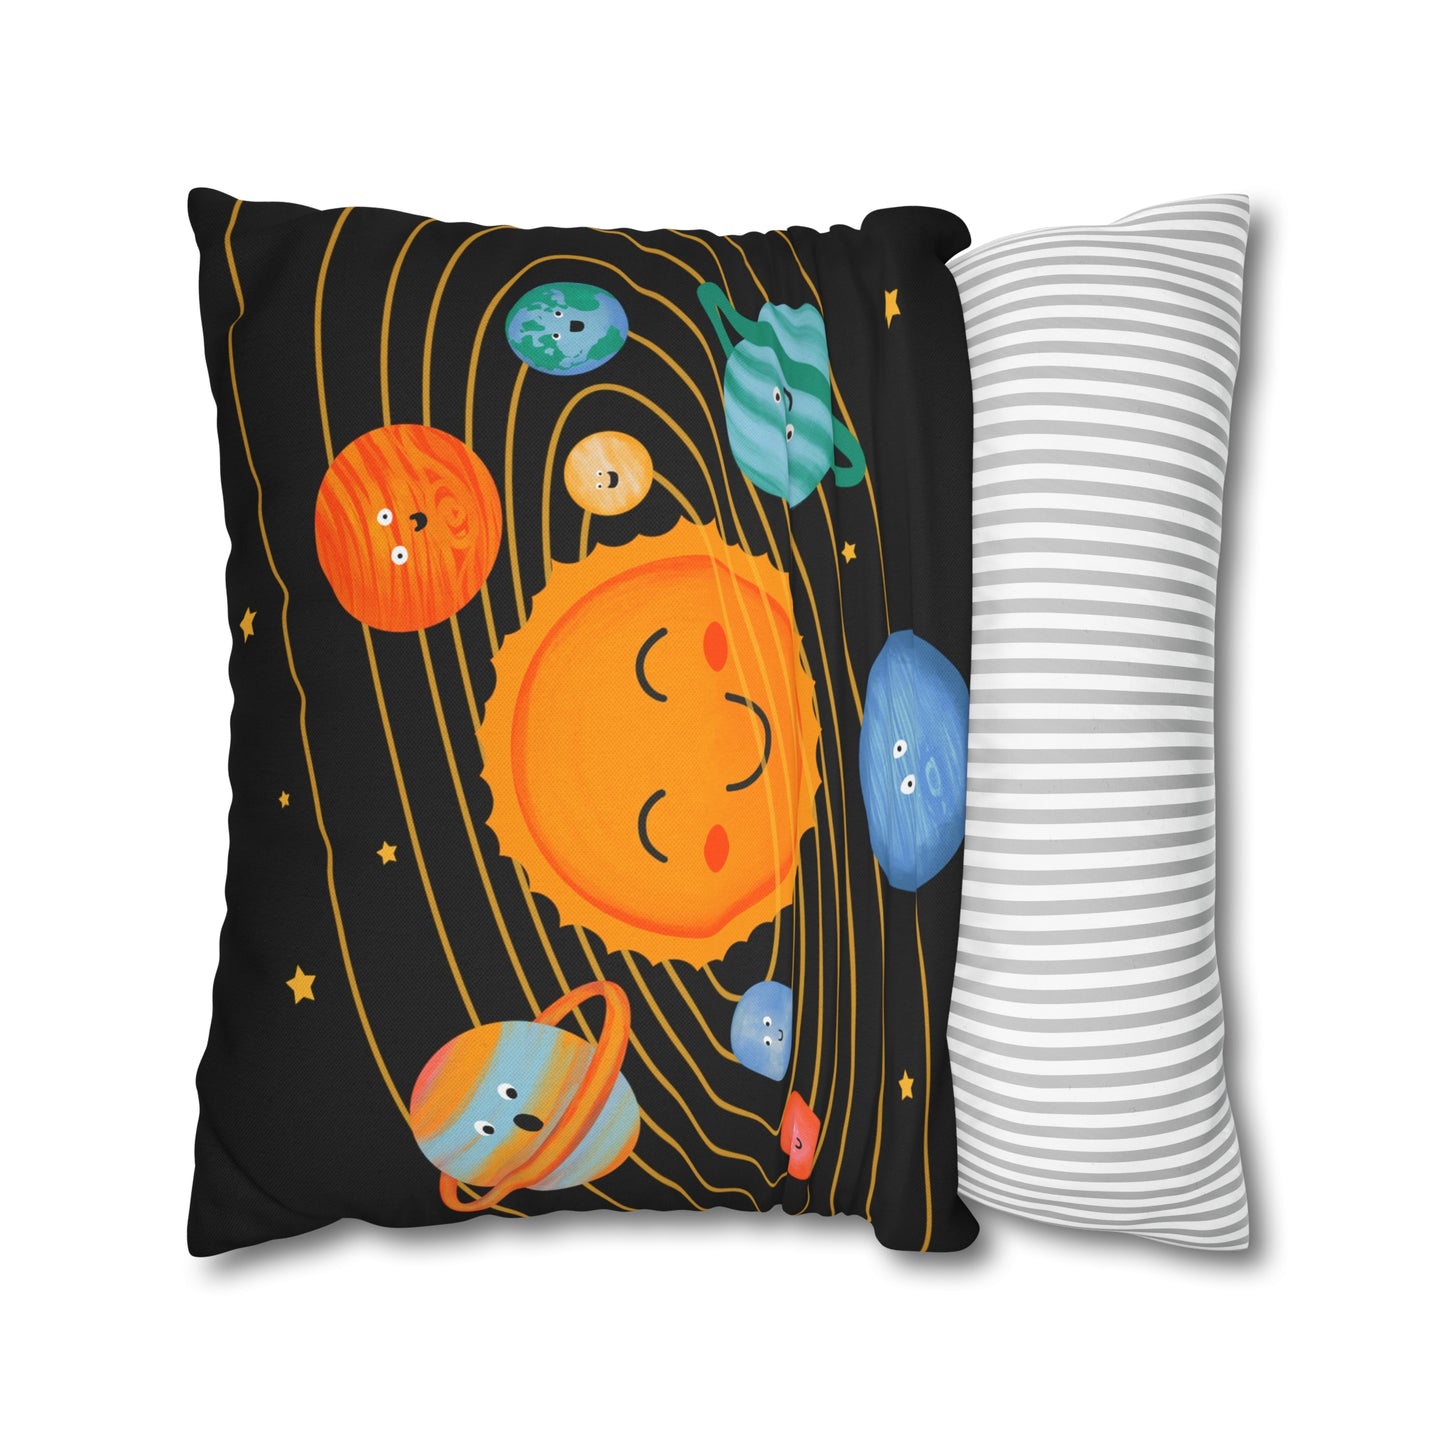 Solar System Spun Polyester Square Pillowcase, Sun and Planets Pillow, STEM Collection Throw Pillow